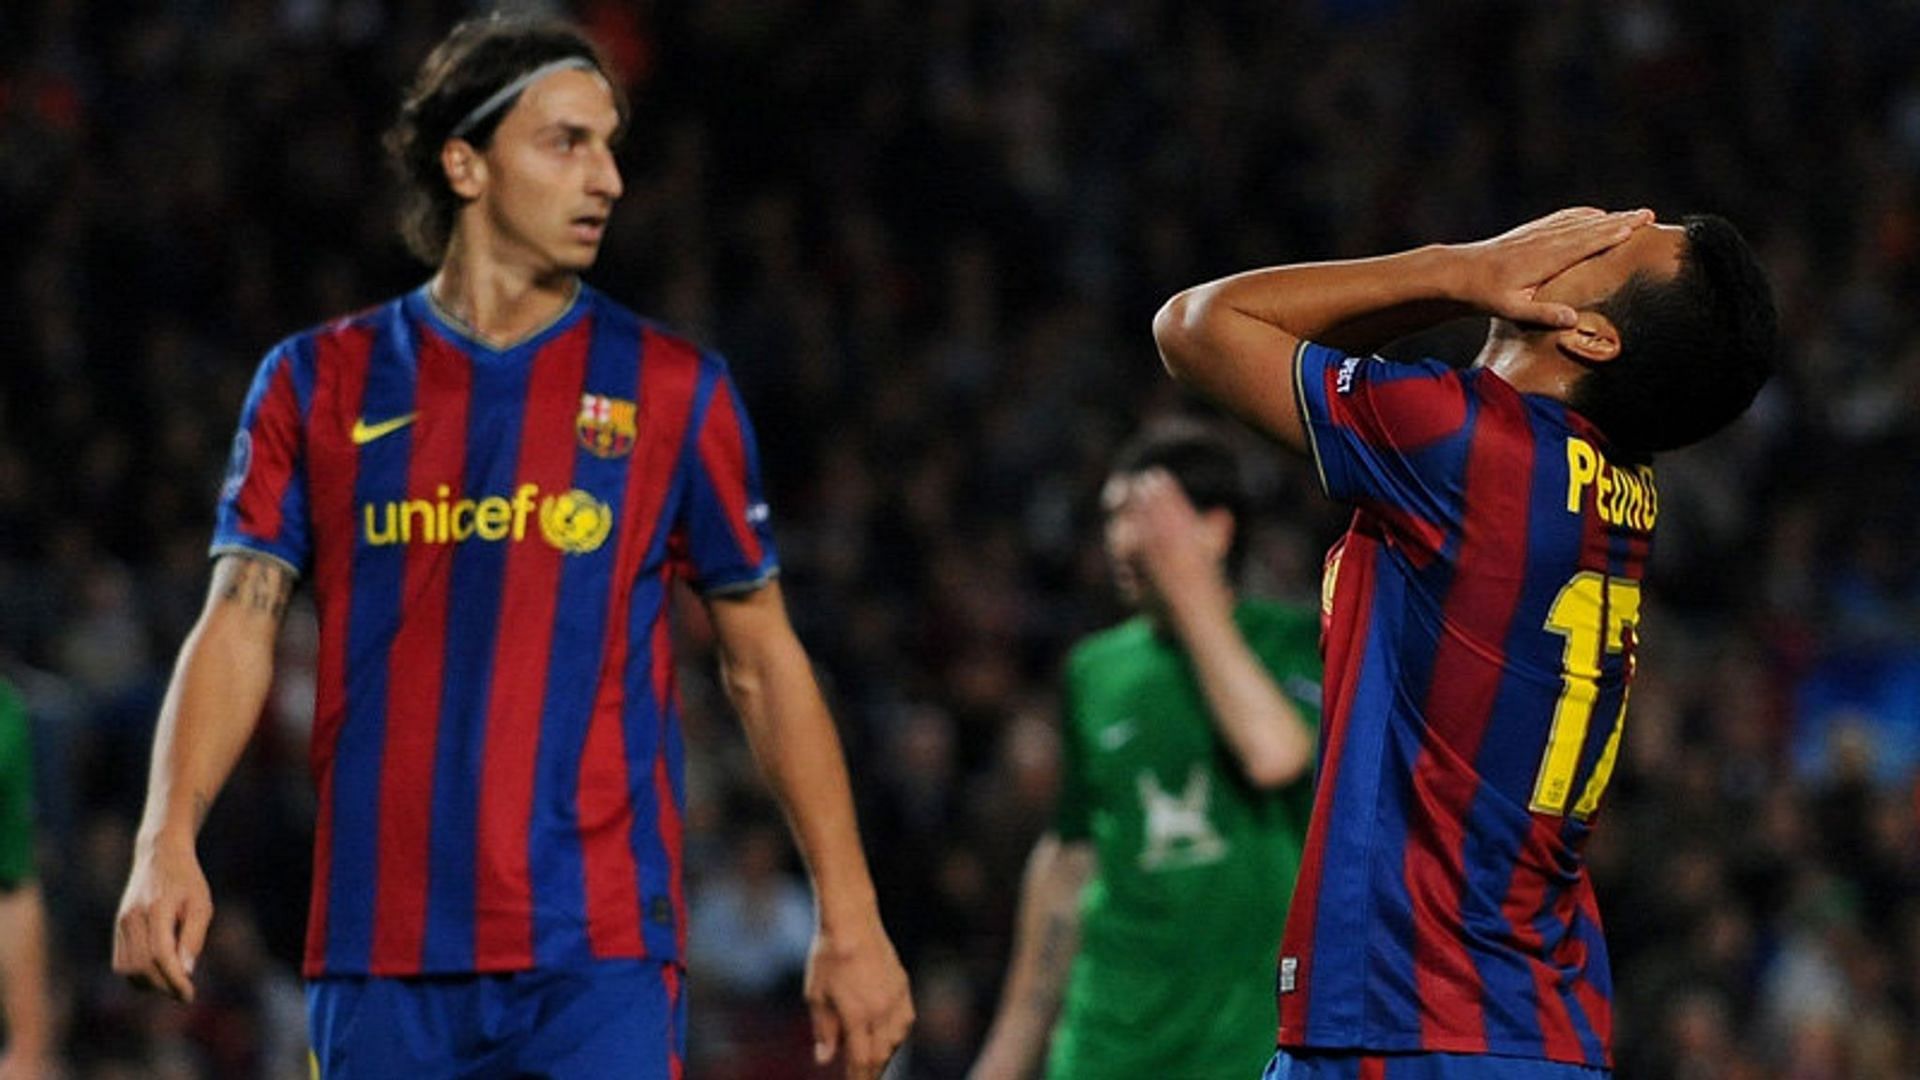 Zlatan Ibrahimovic was not played in his favored position by Barcelona.